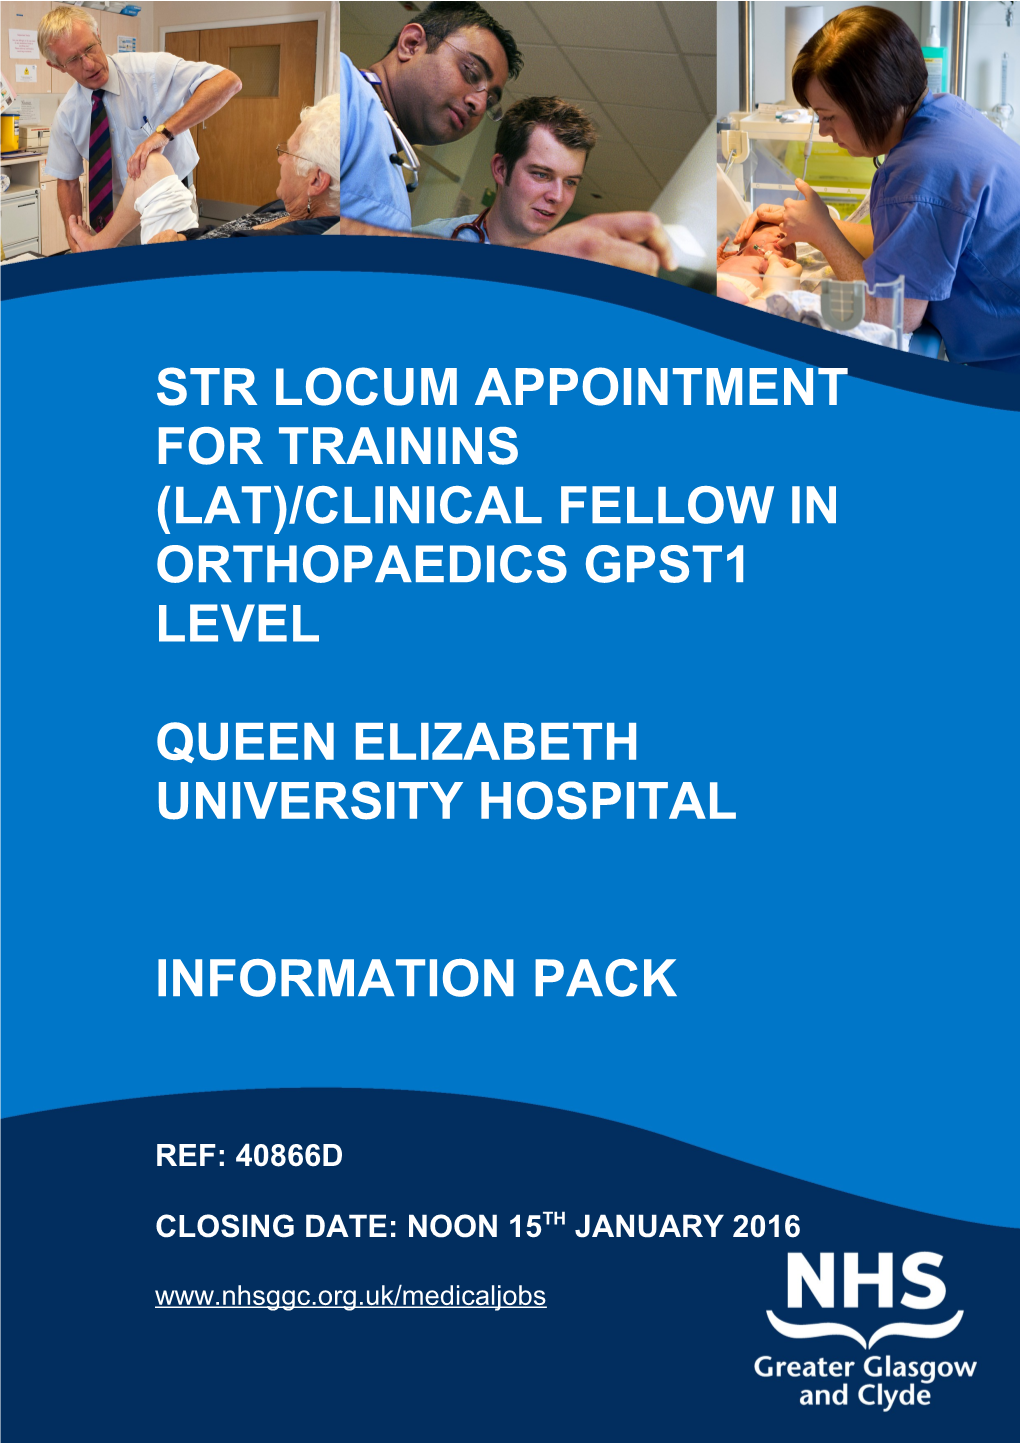 Str Locum Appointment for Trainins (LAT)/Clinical Fellow in Orthopaedics Gpst1 Level